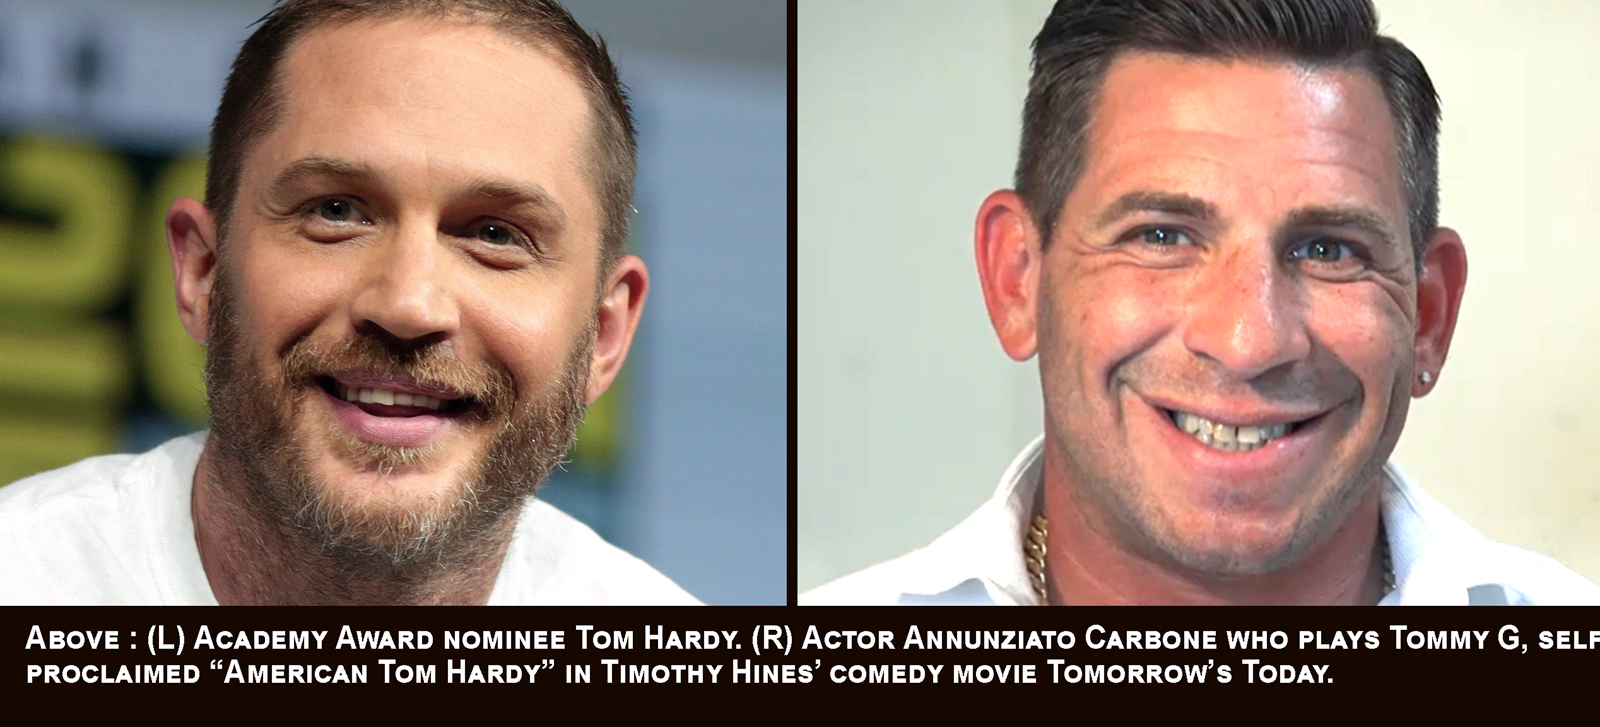 Tom Hardy Wins Ju Jitsu Competition, as Annunziato Carbone, the "American Tom Hardy" has Big Win With New Comedy Movie "Tomorrow's Today".